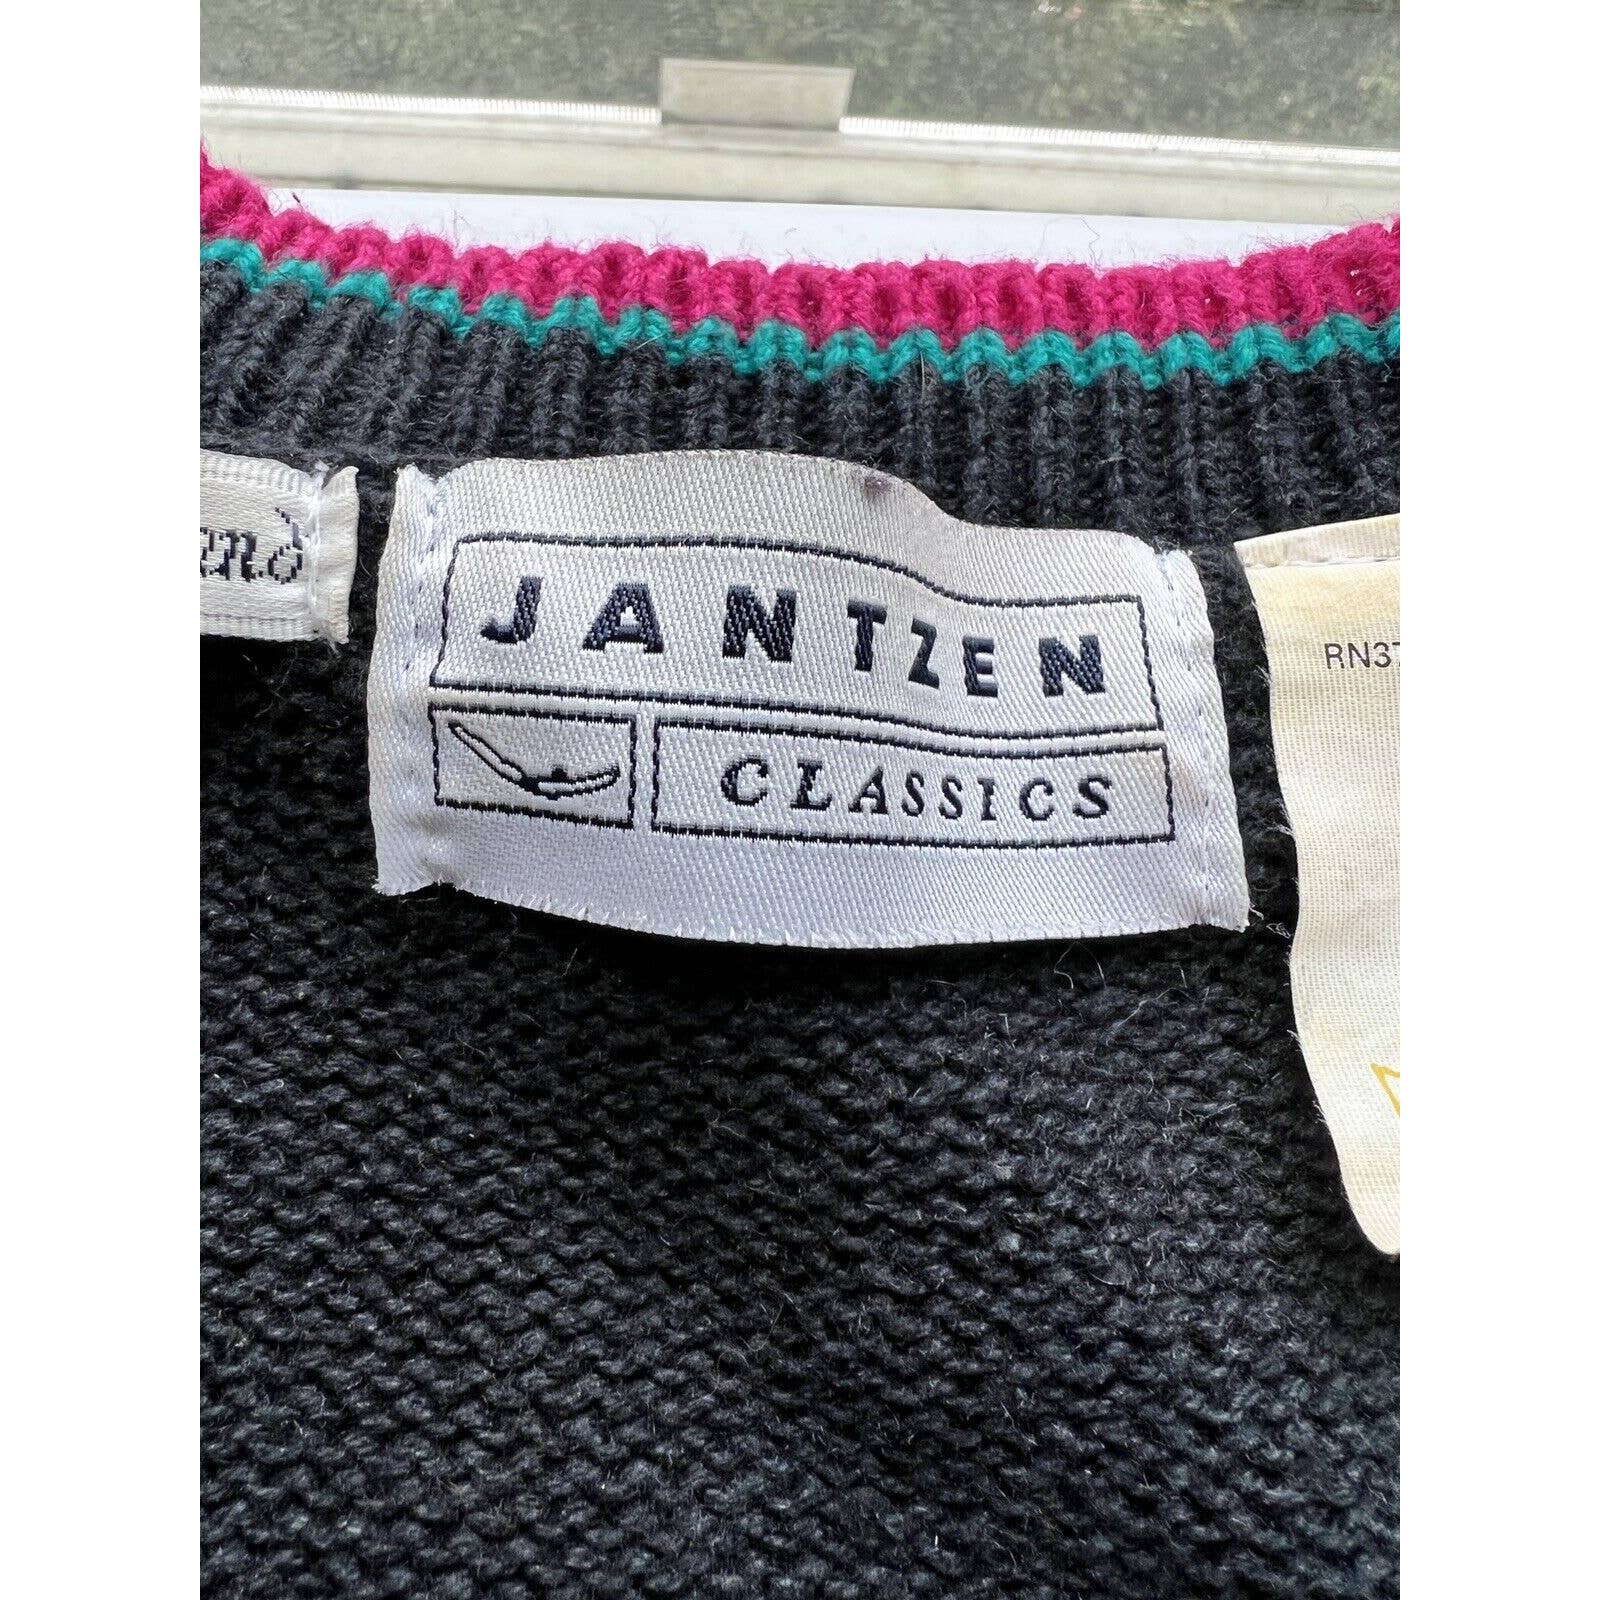 Jantzen Classics Cardigan Sweater Womens Large Embroidered By Hand Floral Black